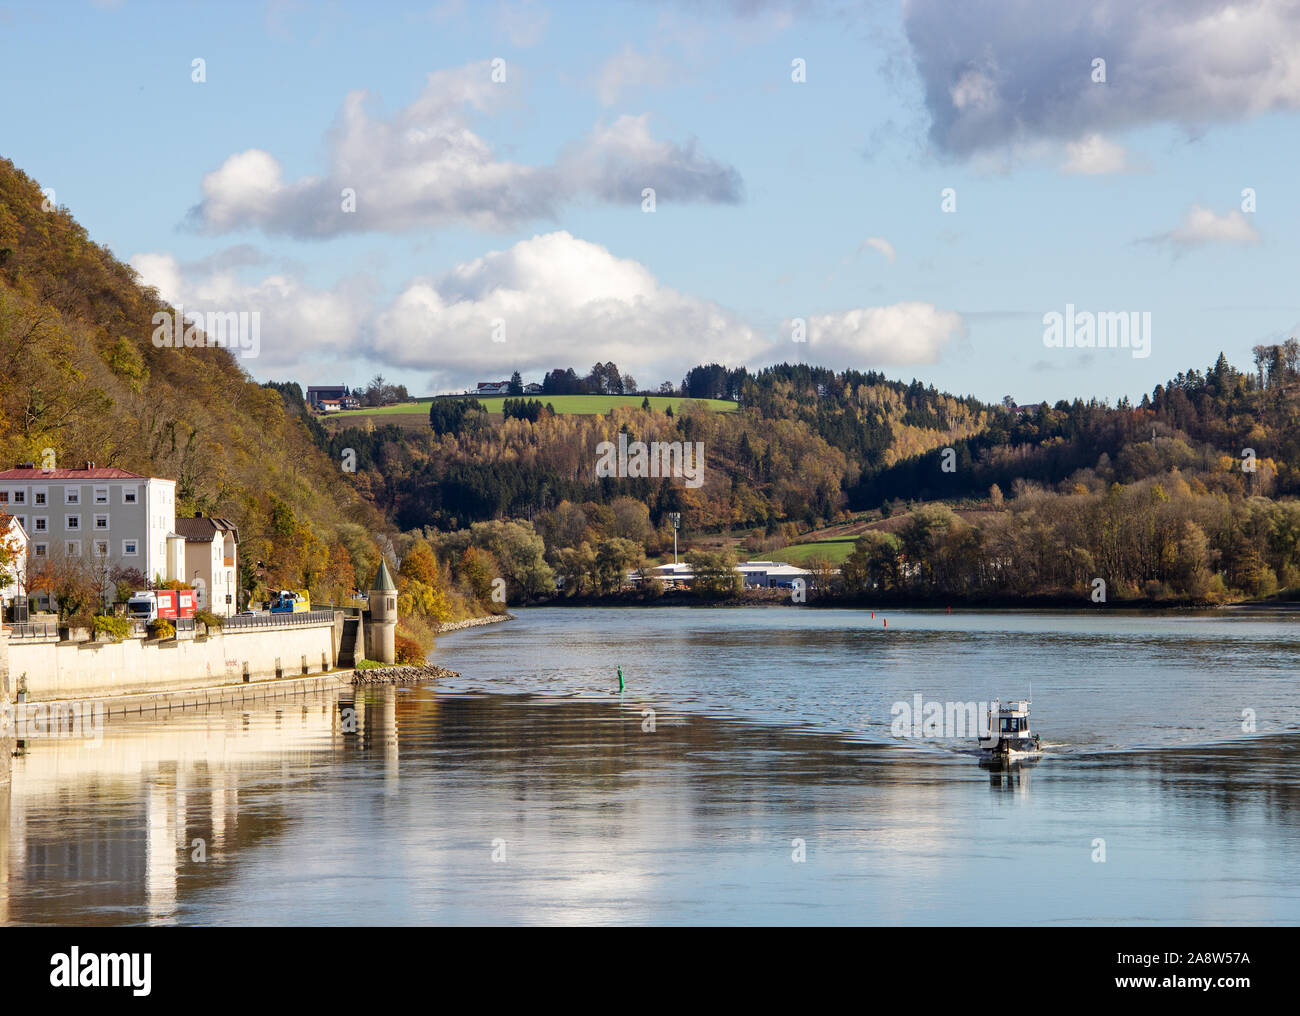 The three-river town Passau where the Danube, Inn and Ilz flow together Stock Photo